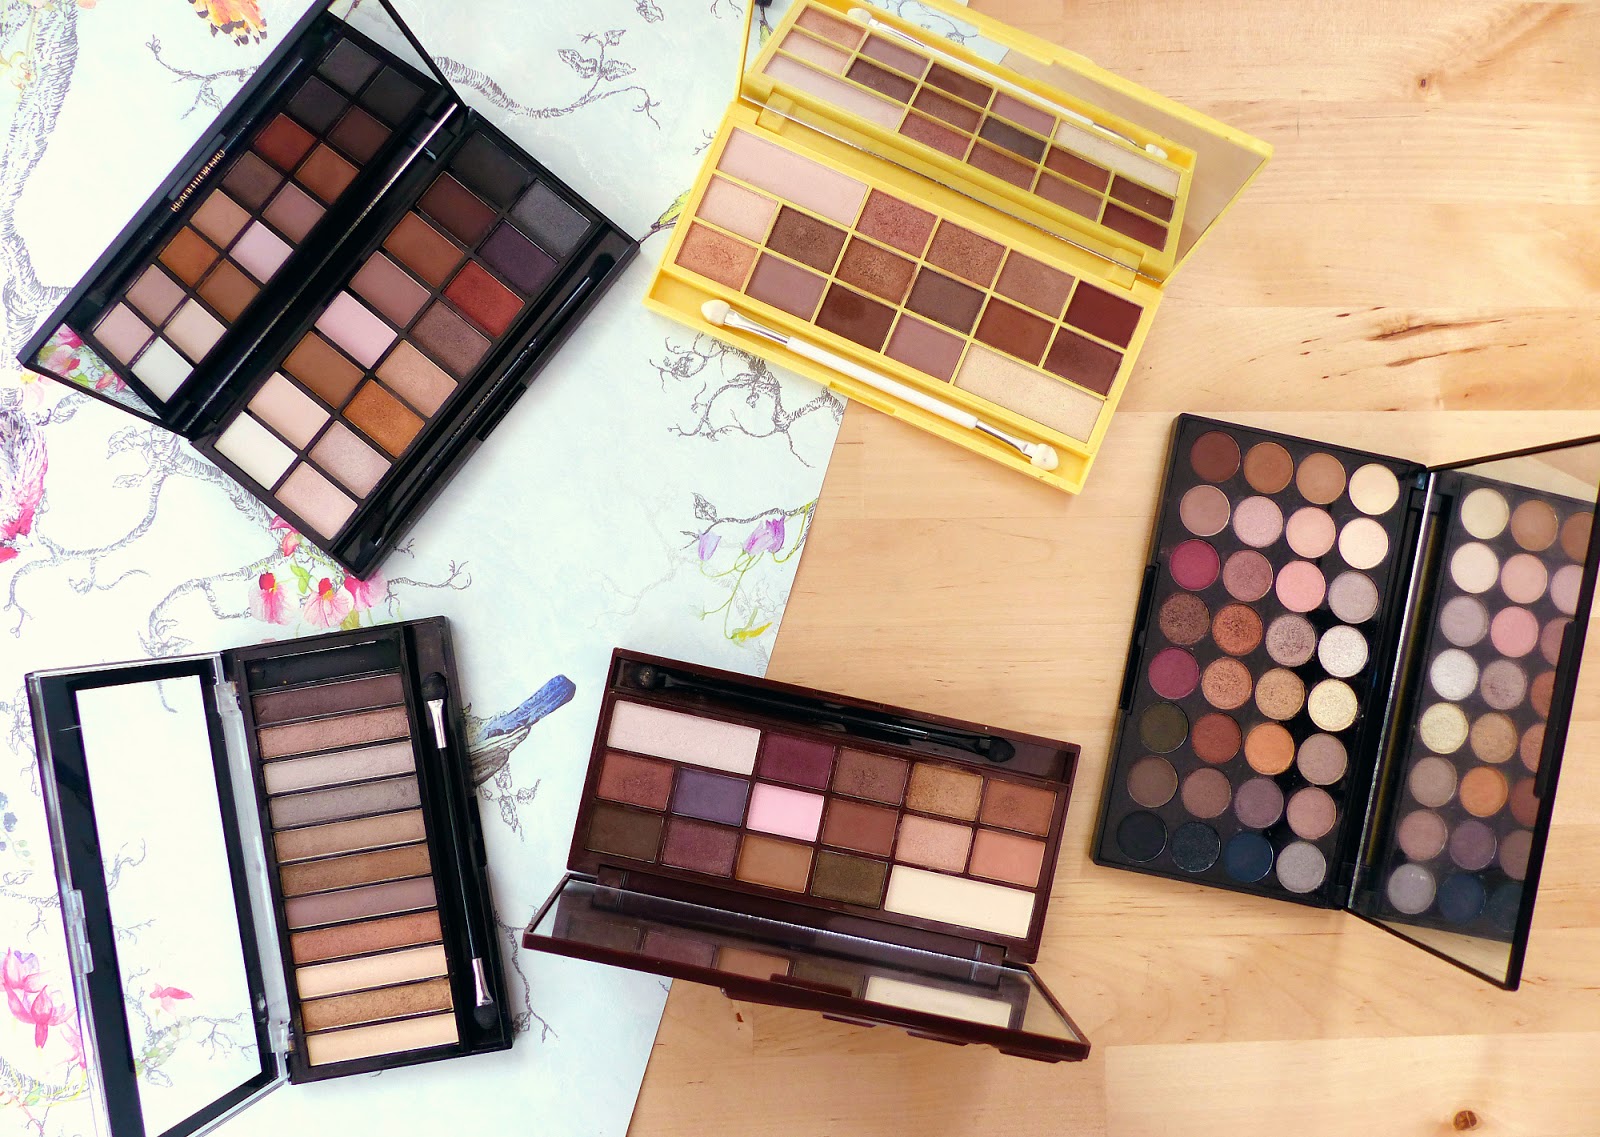 Top 5 Colourful Eyeshadow Palettes for Summer